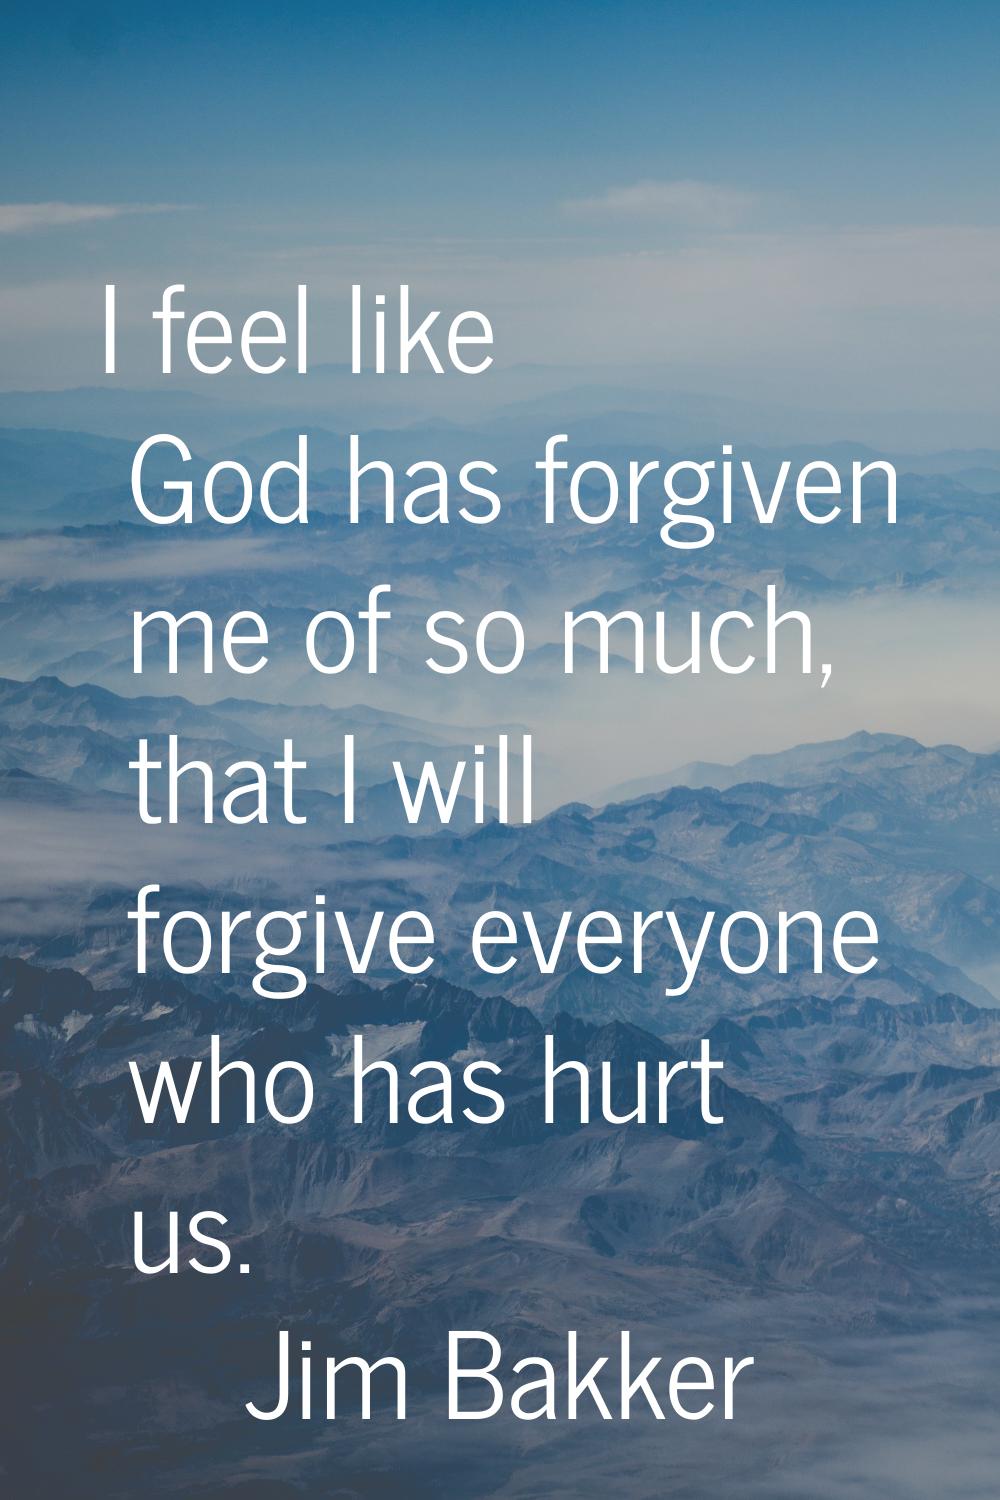 I feel like God has forgiven me of so much, that I will forgive everyone who has hurt us.